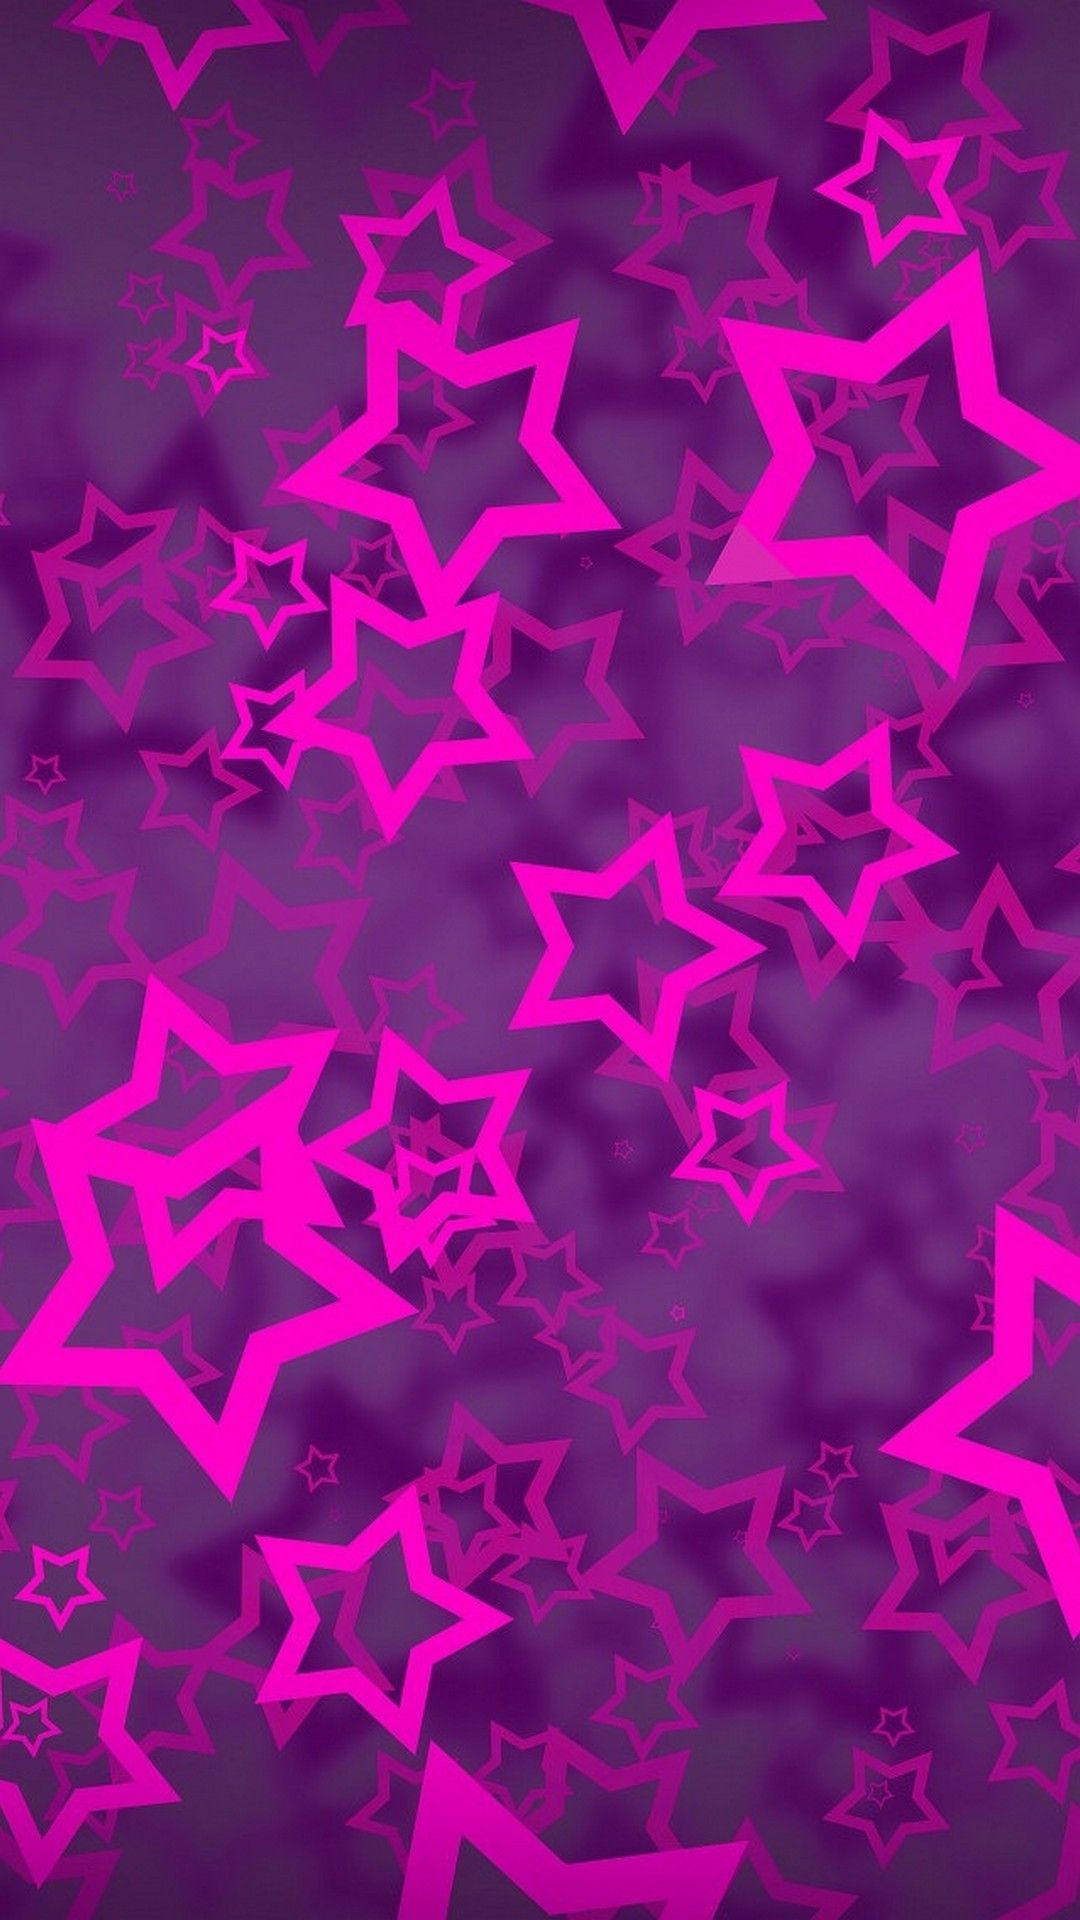 Pink and Purple Wallpaper For Mobile. Best HD Wallpaper. Pink and purple wallpaper, Purple wallpaper, Purple wallpaper hd